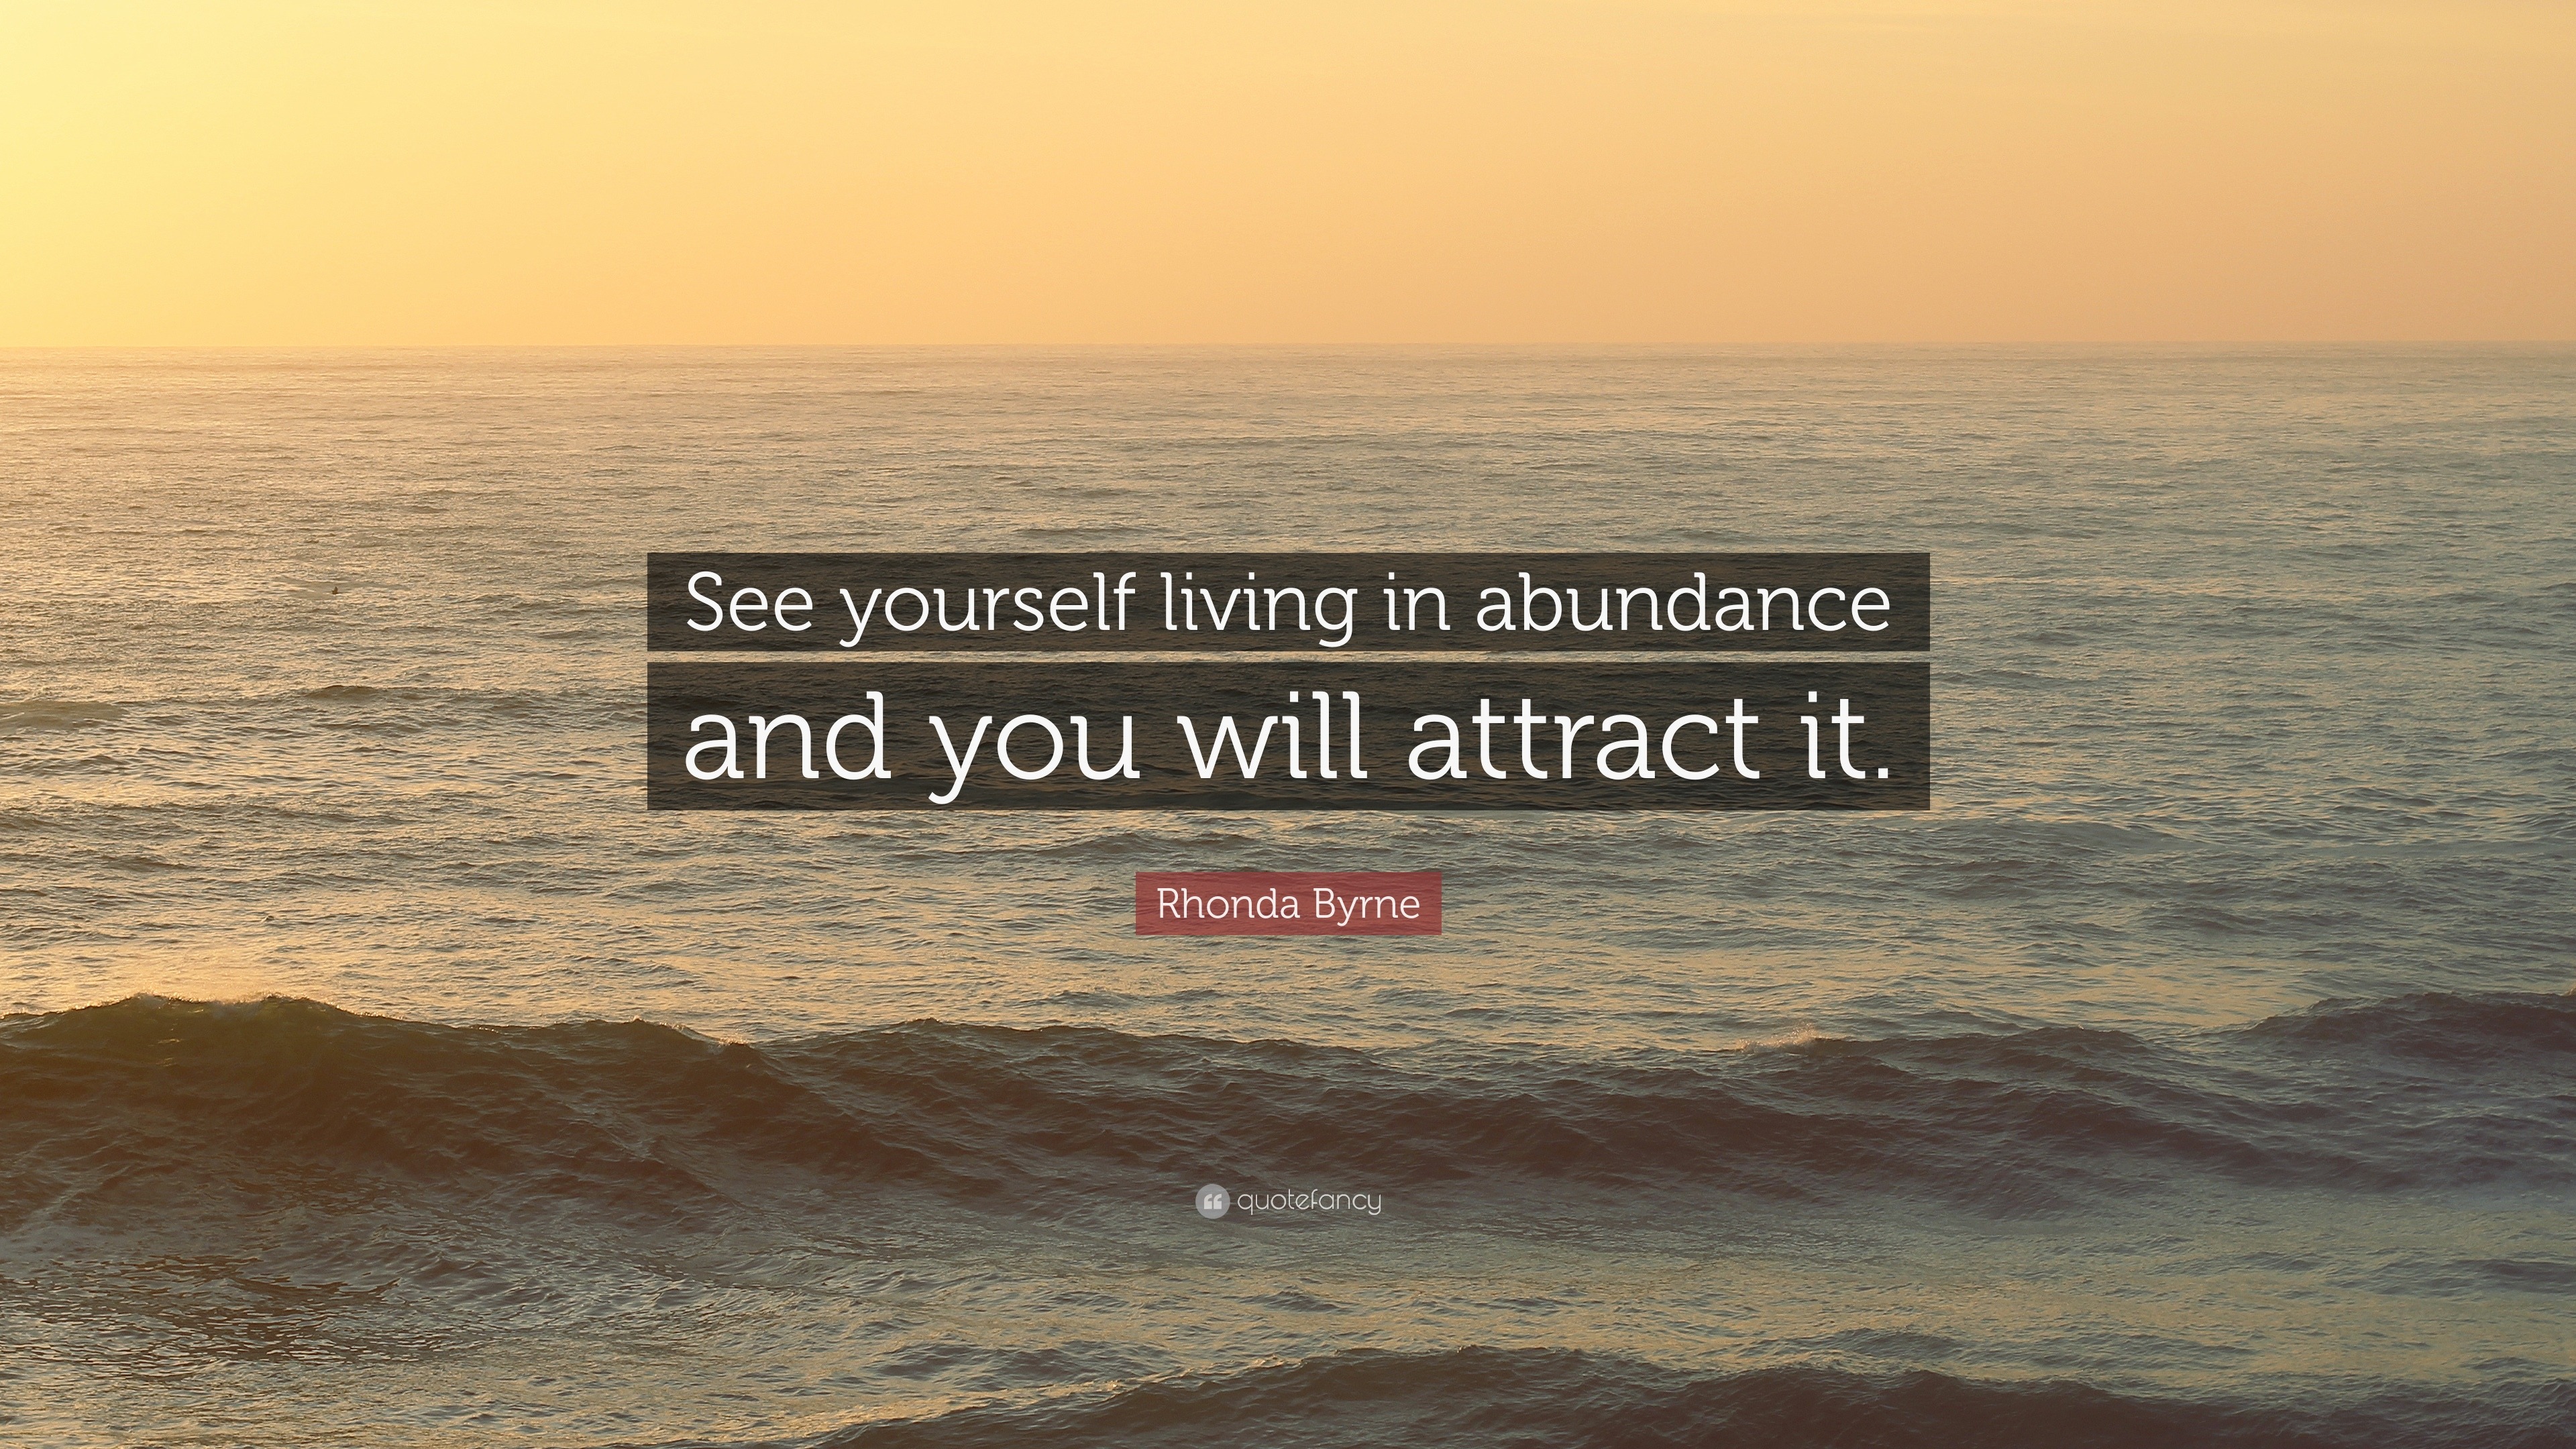 Inspirational Quotes From Rhonda Byrne's Book The Secret